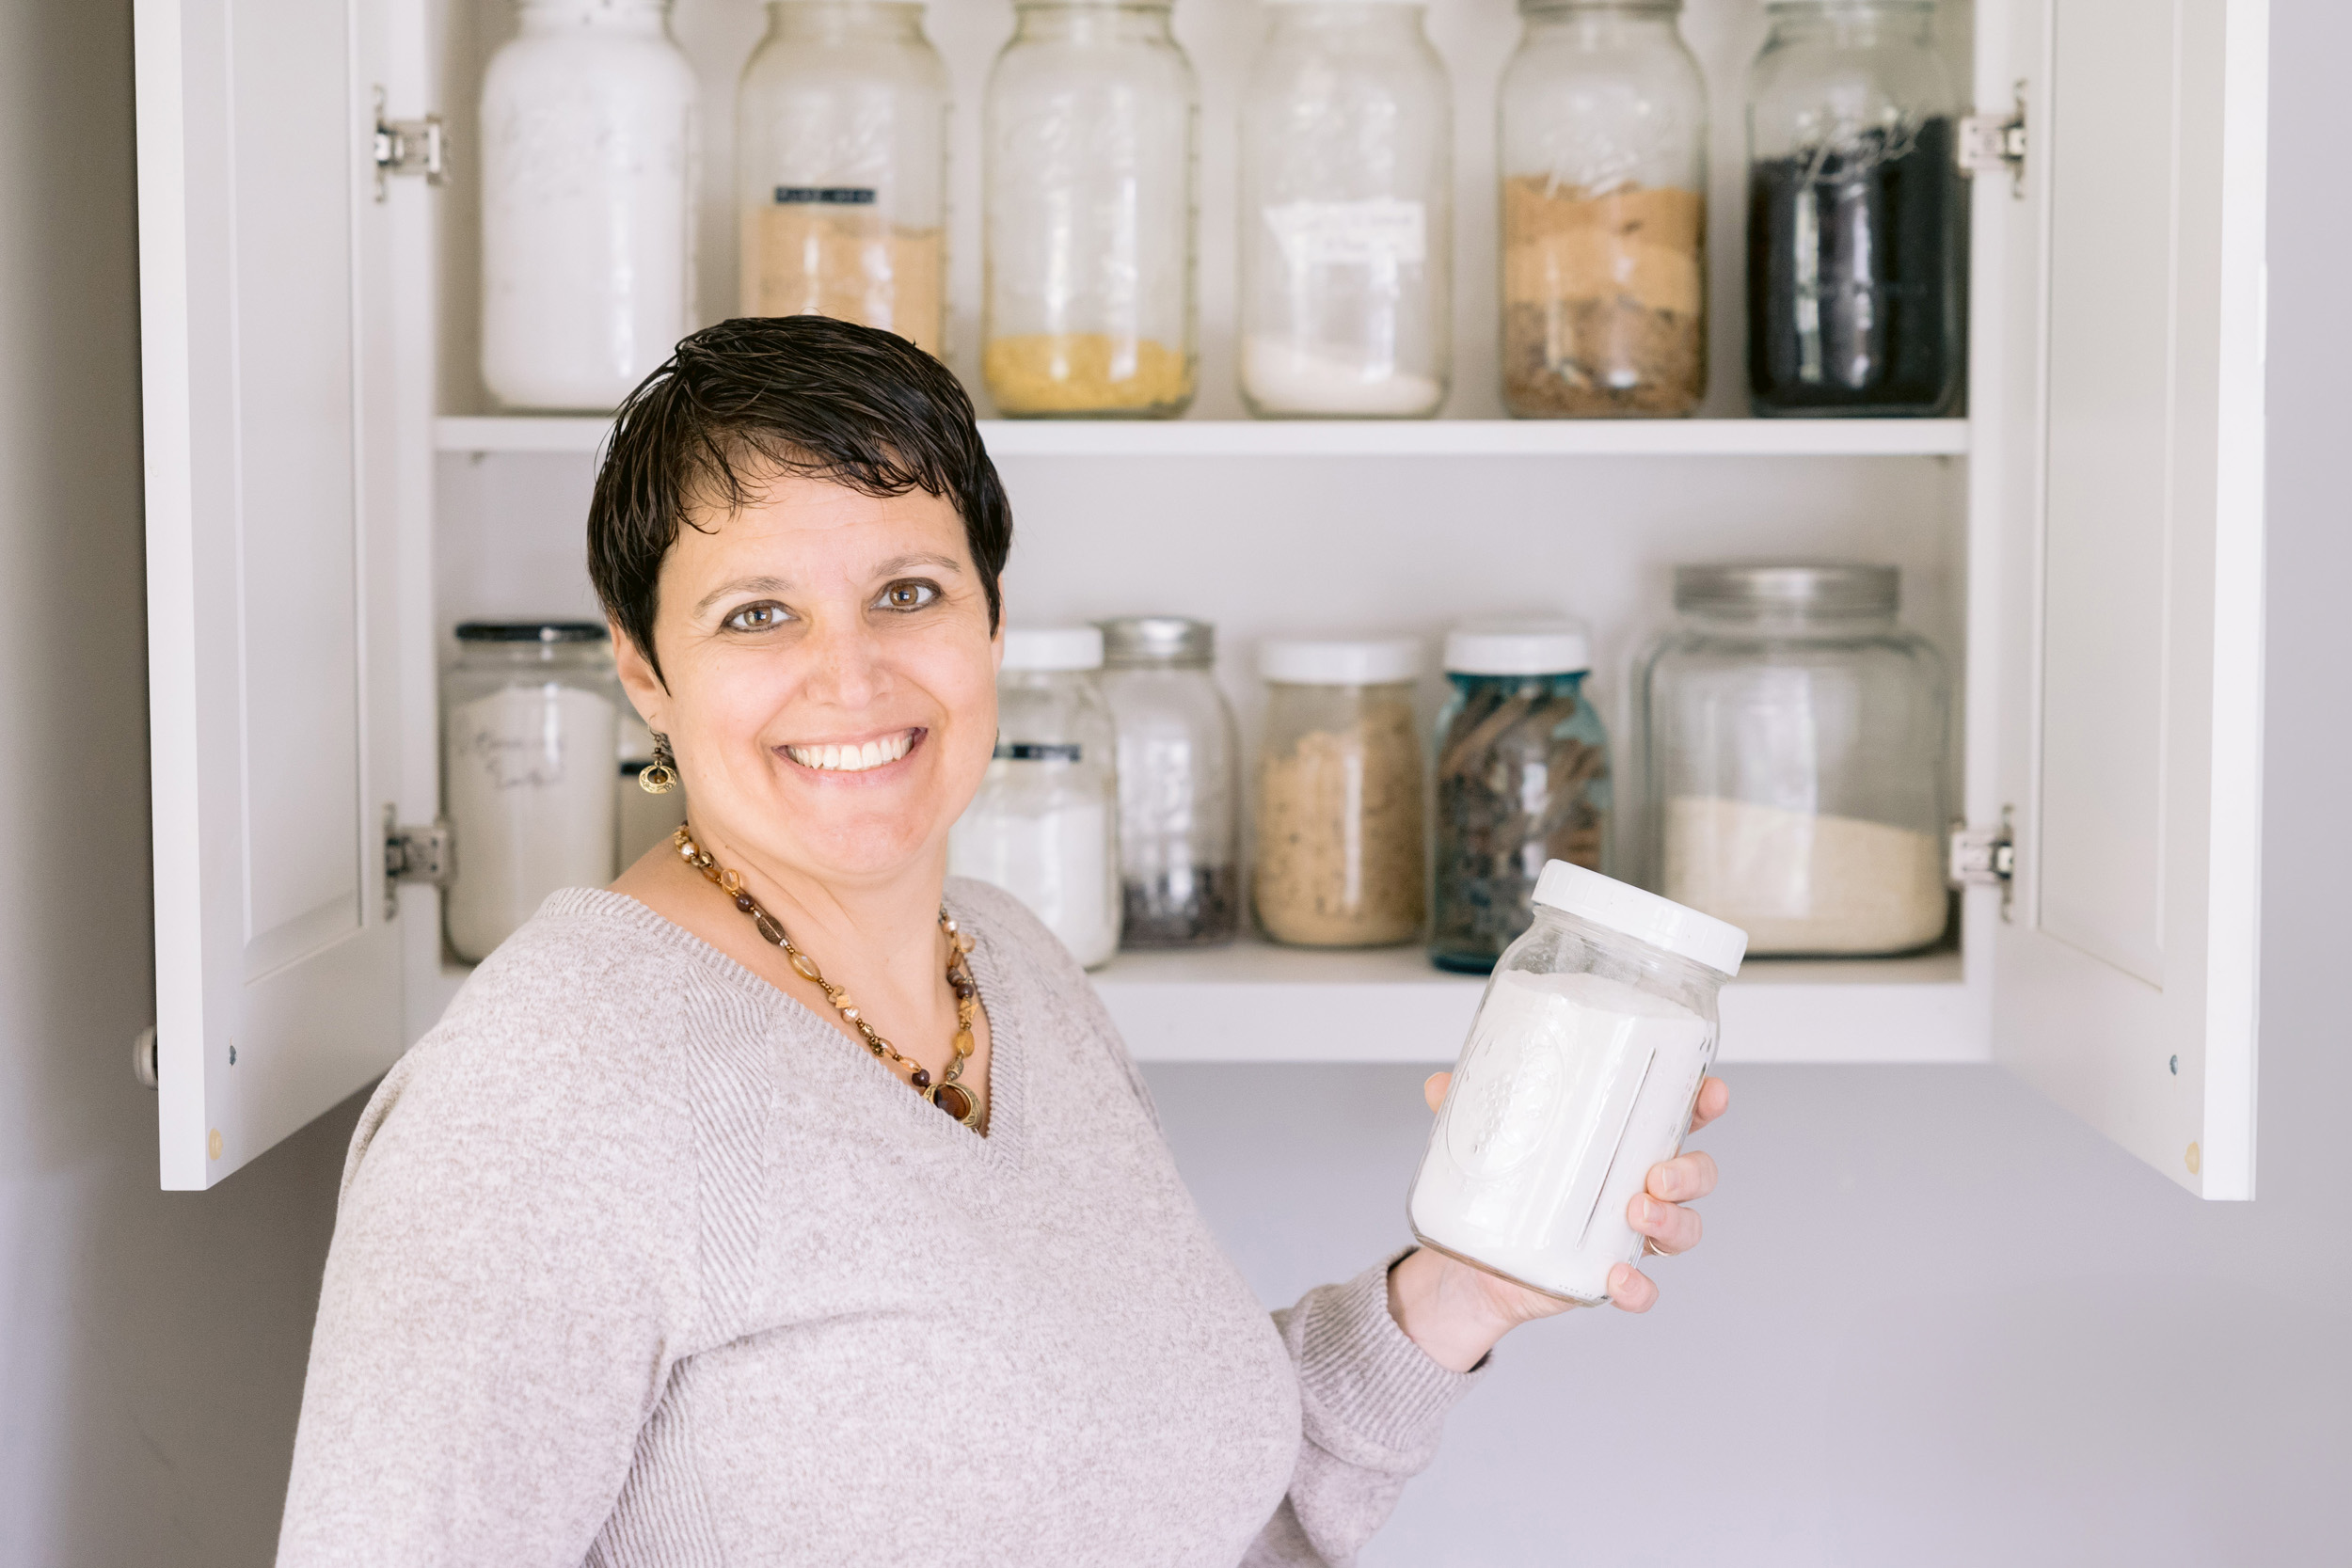 Juliana Kathman, from Organized by Juliana, poses with a jar of flour in hand, surrounded by a shelf of jars. Photo by Mabyn Ludke Photography in Statesville, NC.